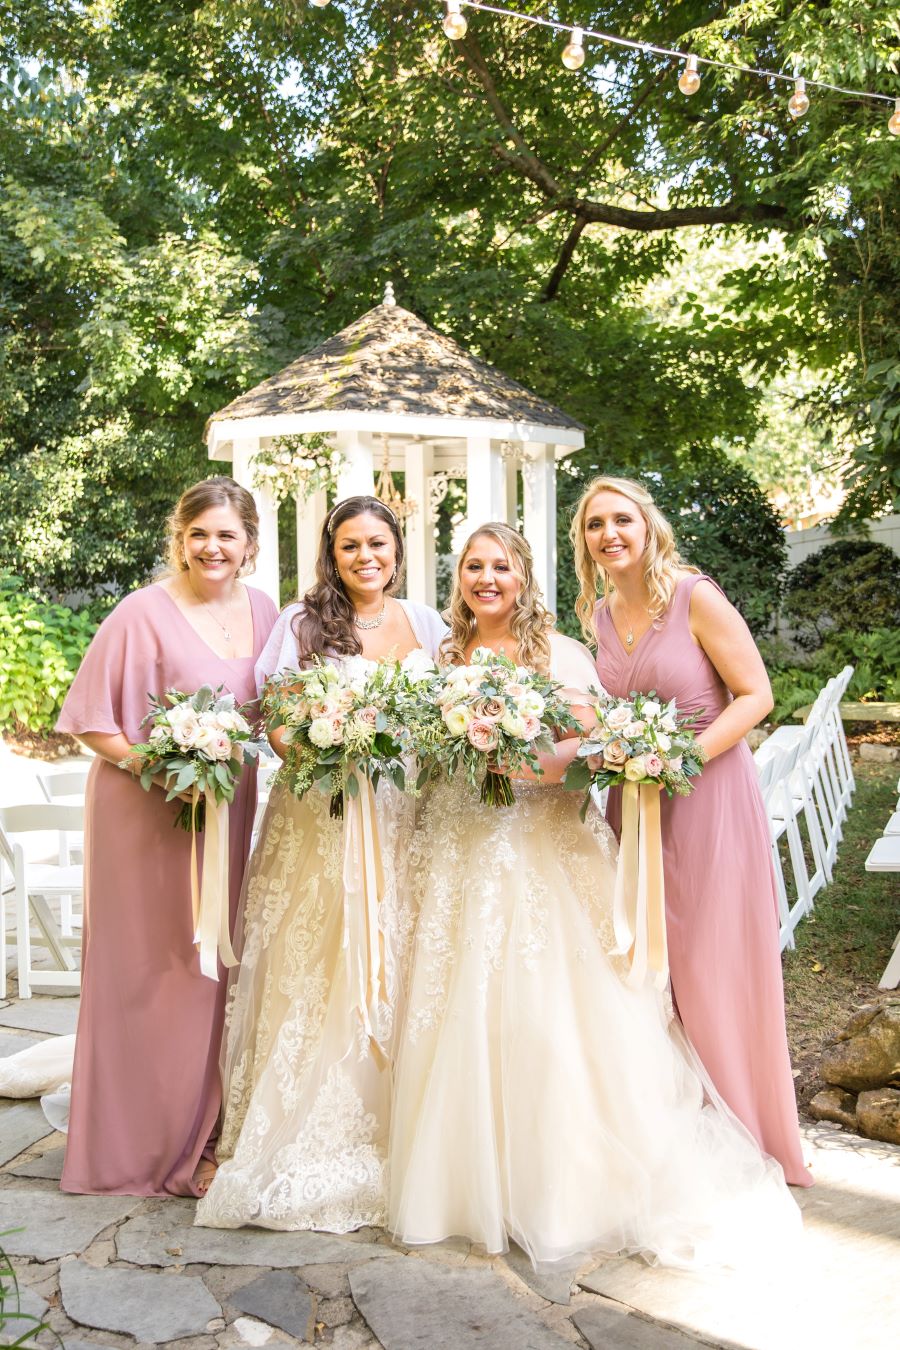 Bridal party with lace gowns and dusty rose bridesmaid dresses / Romantic / Summer / September / Pink / Dusty Rose / Cream